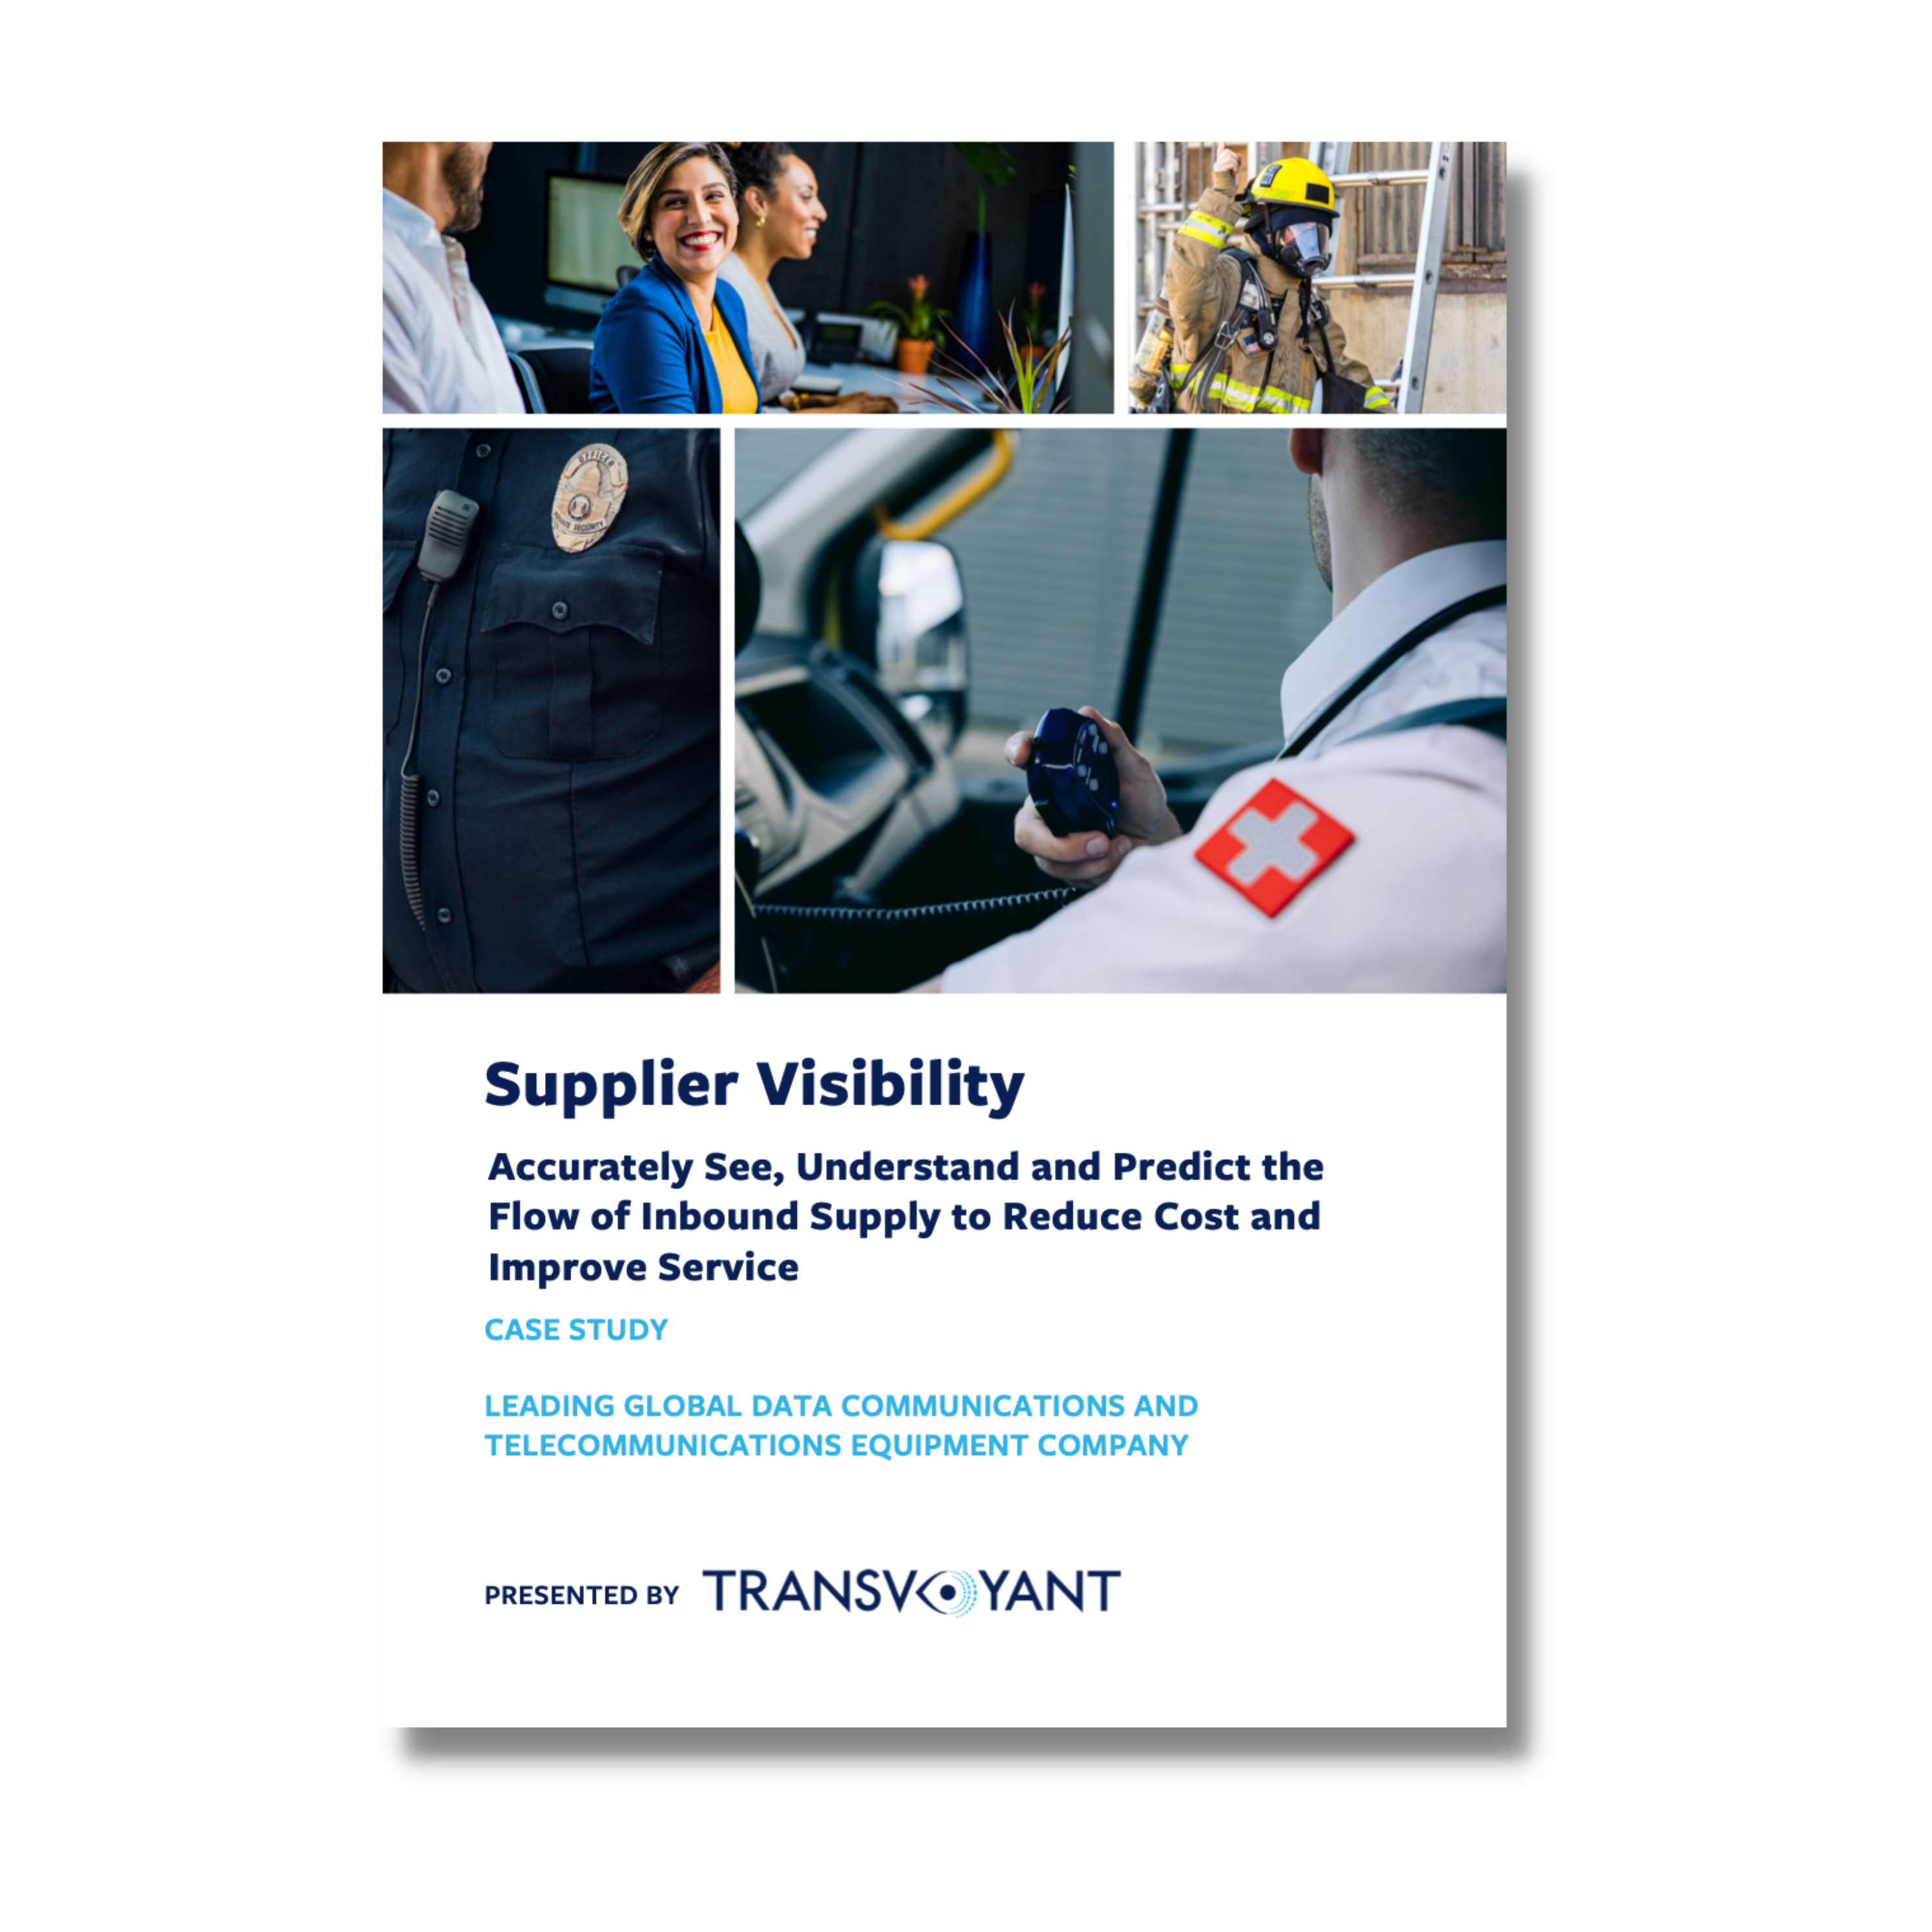 Supplier Visibility Case Study banner